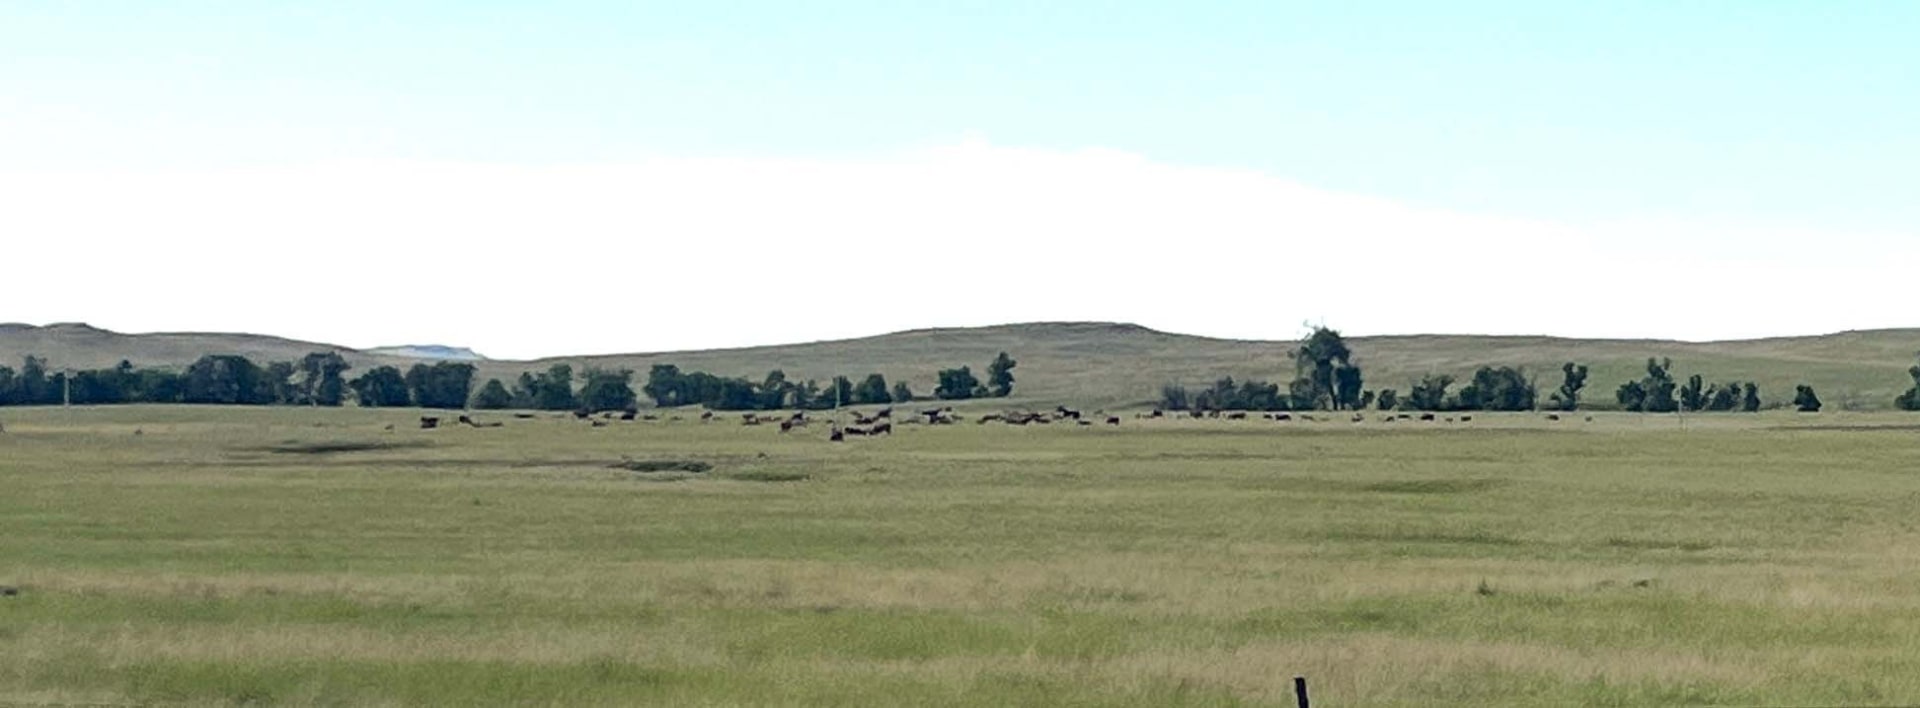 hereford cattle grazing montana ringling ranch II